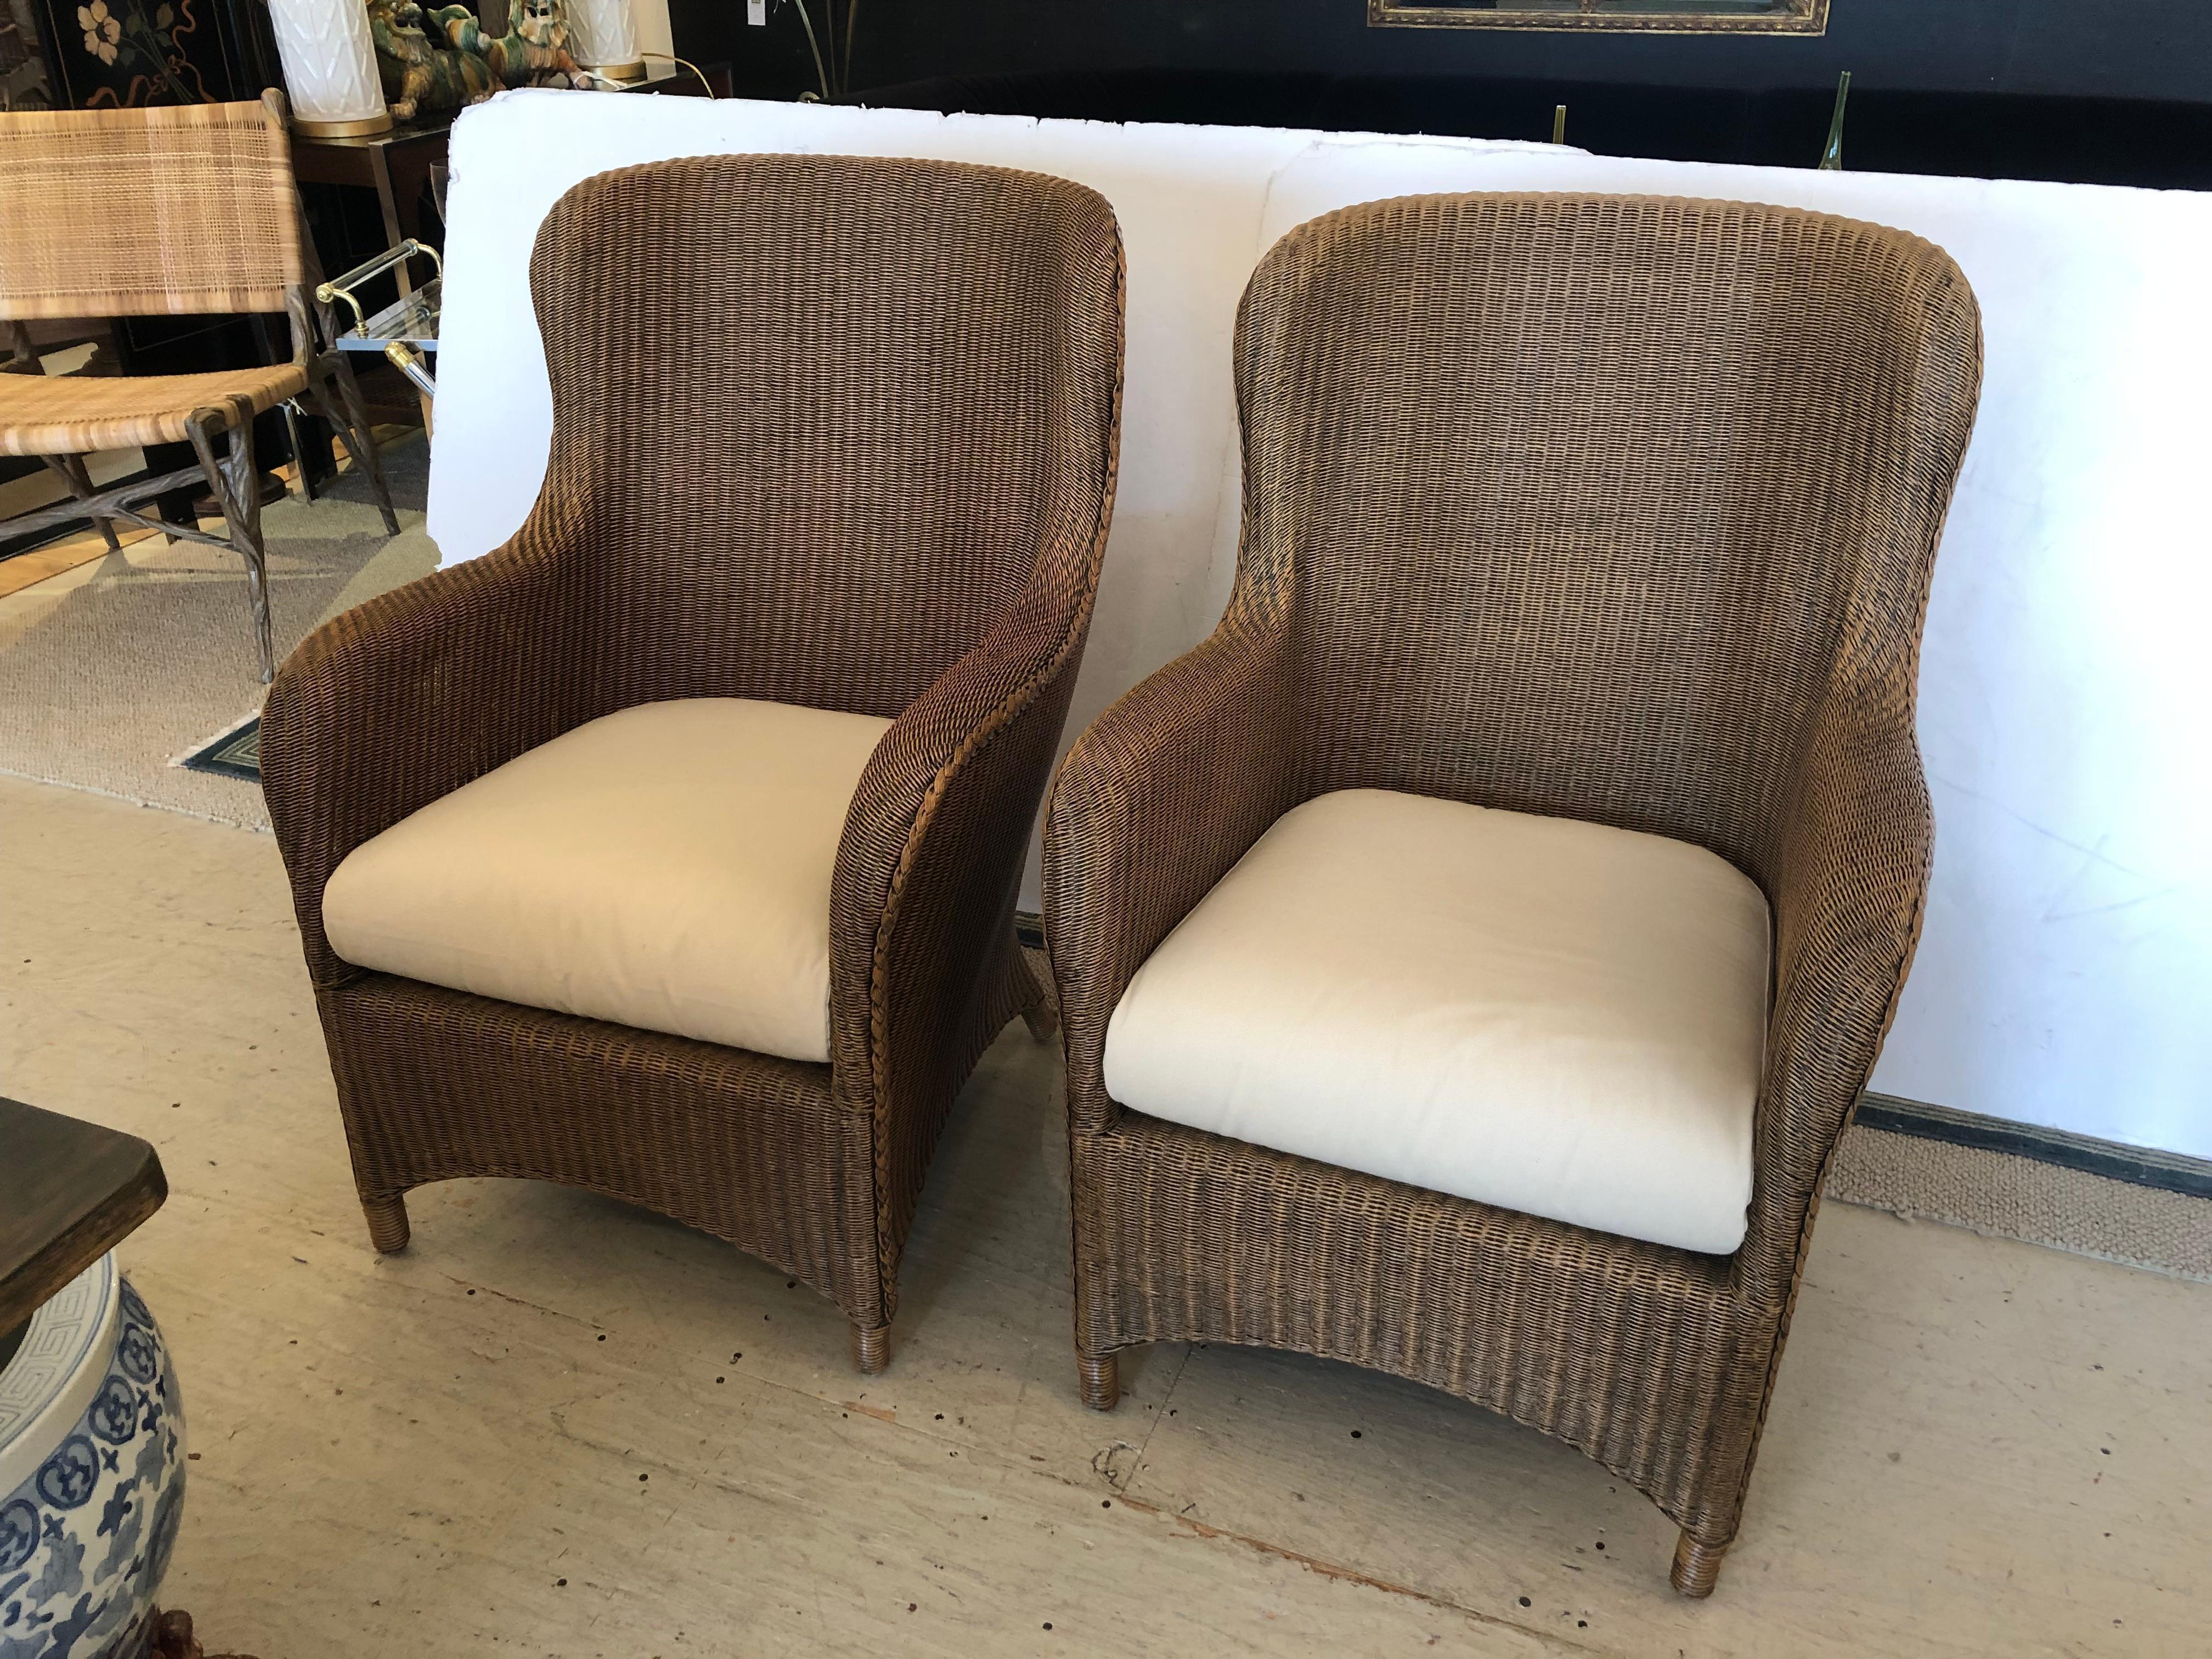 Late 20th Century Sensational Pair of Large Curvy Natural Brown Wicker Lounge Club Chairs For Sale